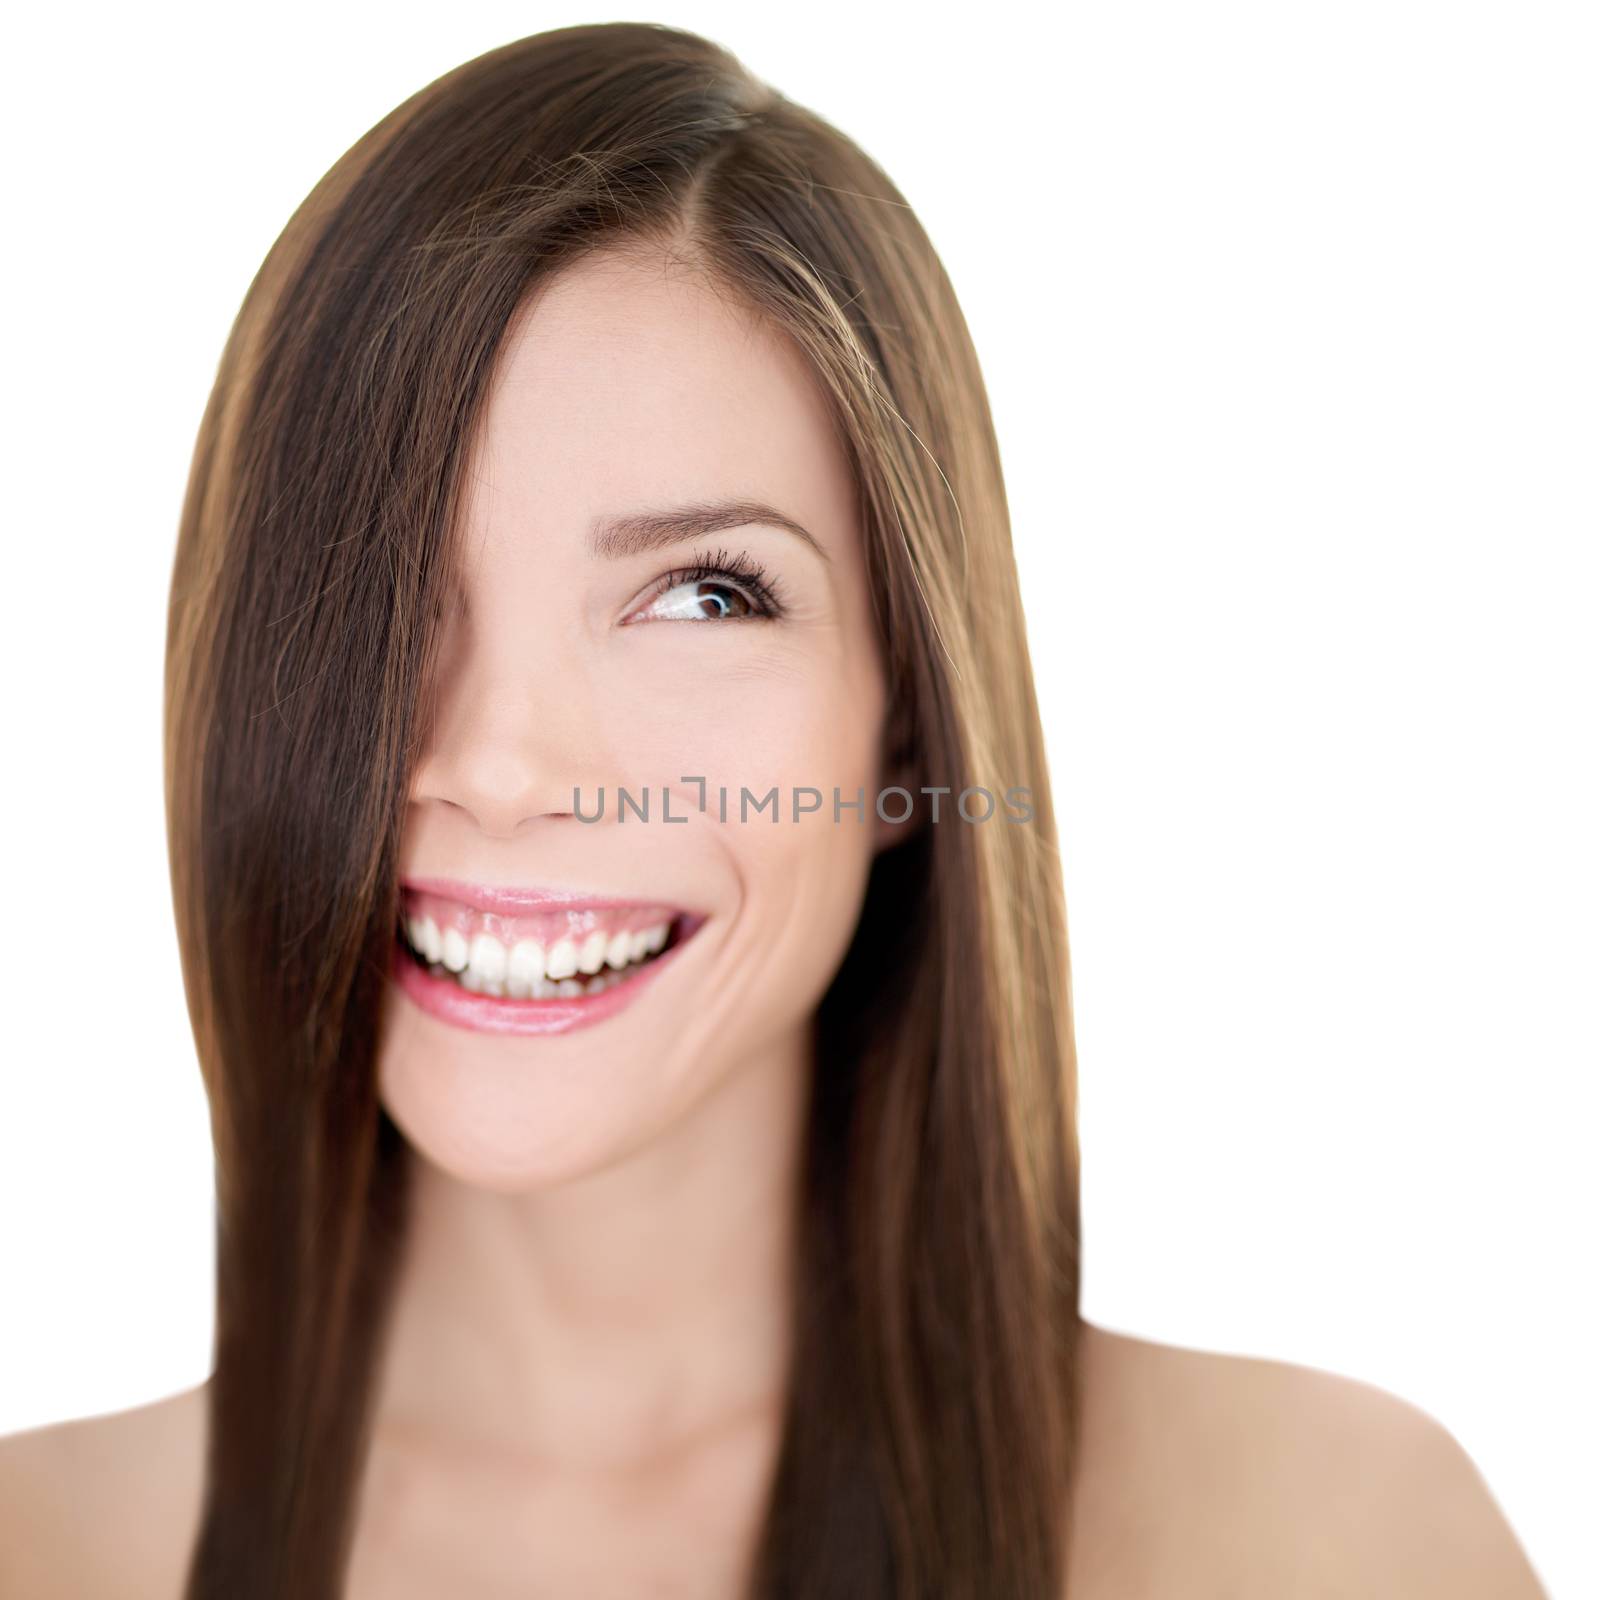 Hair care Asian woman smiling looking at white background copyspace. Beautiful girl with long straight brown hair for haircut or hairstyle beauty salon concept. Happy natural smile person.